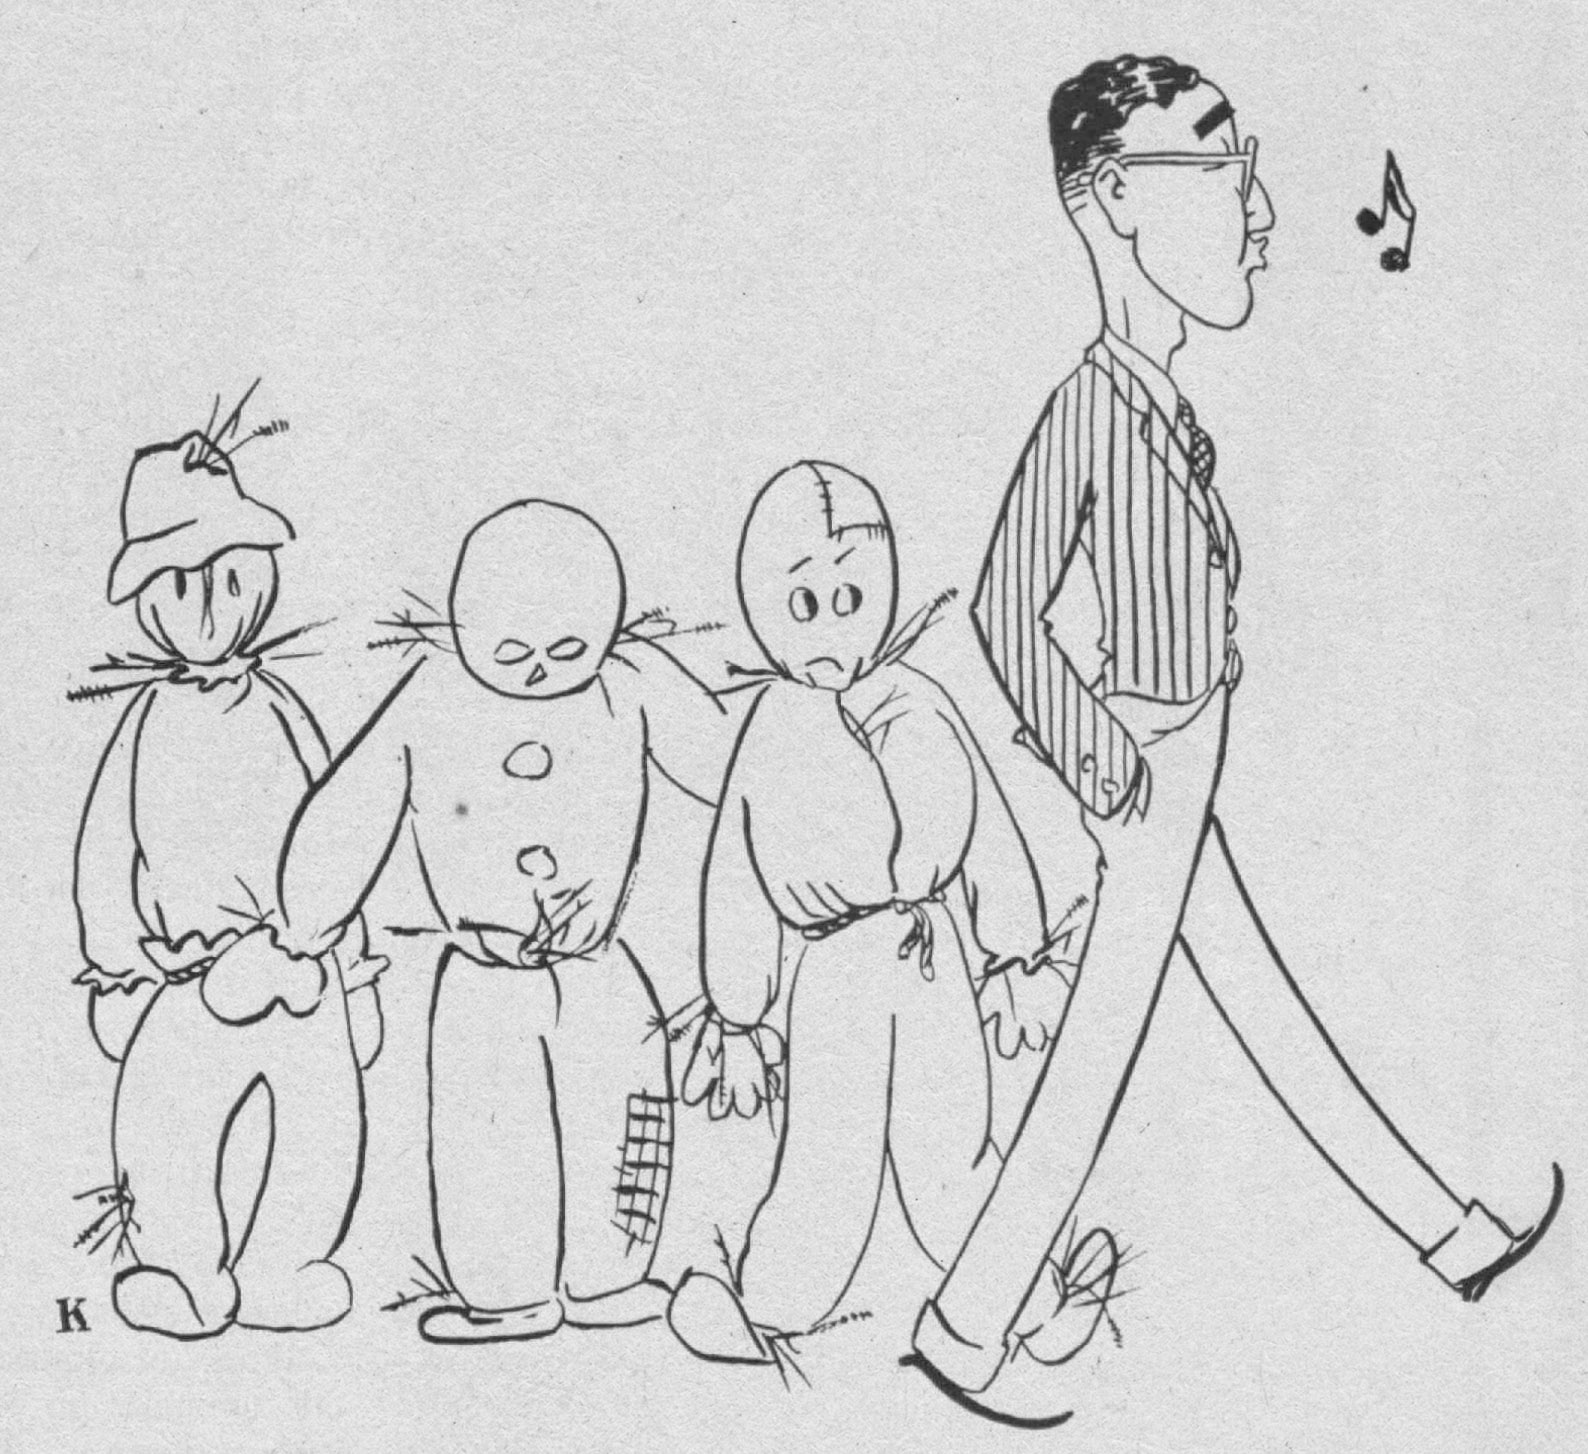 1962 cartoon of Robert Solow walking past three scarecrows and whistling nonchalantly